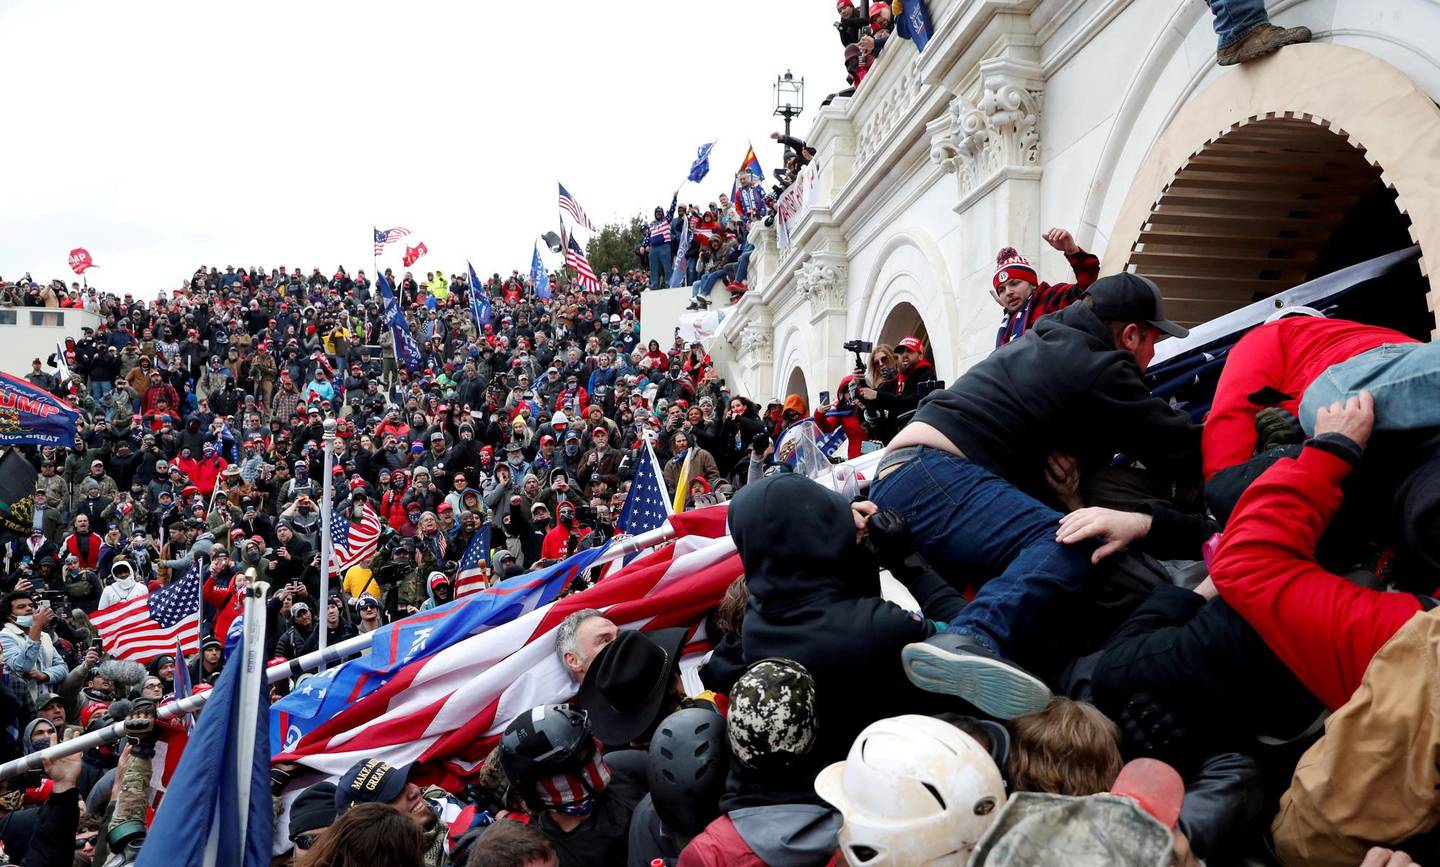 FILE PHOTO: Pro-Trump protesters storm into the U.S. Capitol during clashes with police, during a rally to contest the certification of the 2020 U.S. presidential election results by the U.S. Congress, in Washington, U.S, January 6, 2021. REUTERS/Shannon Stapleton/File Photo